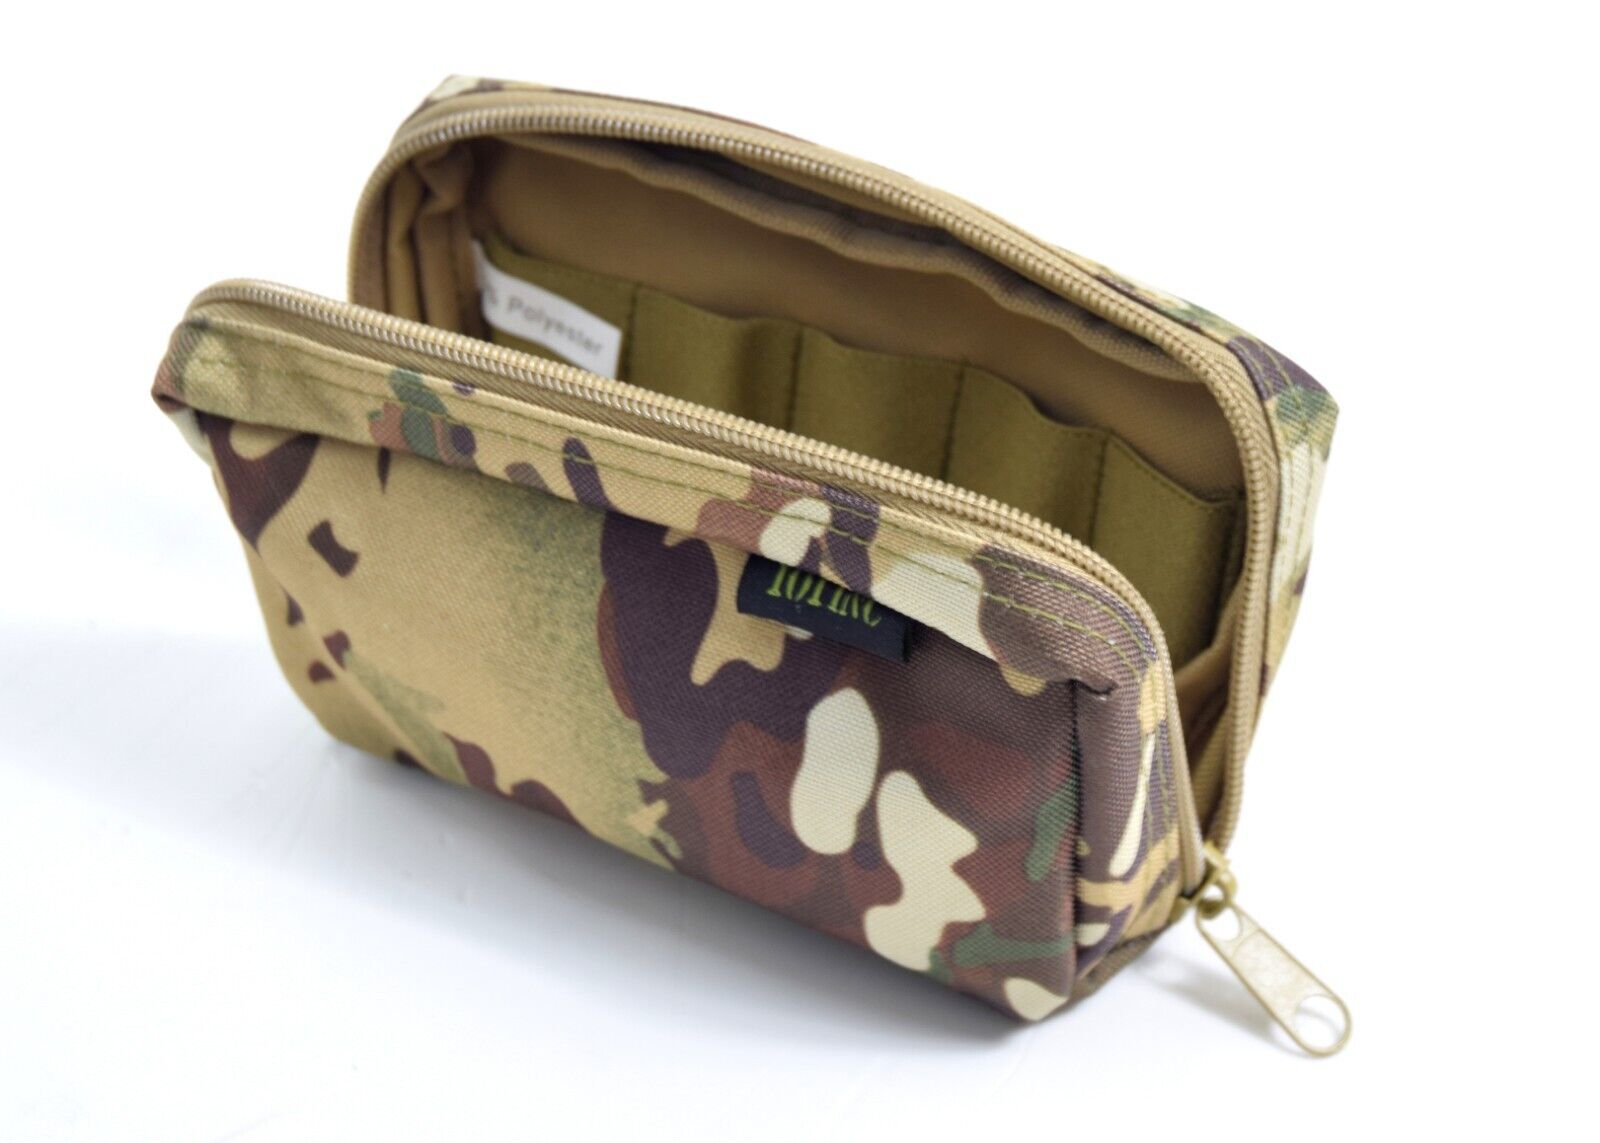 British Army Style MTP CO2 Holder Pouch Horizontal Utility Pouch 12g Capsule Gas